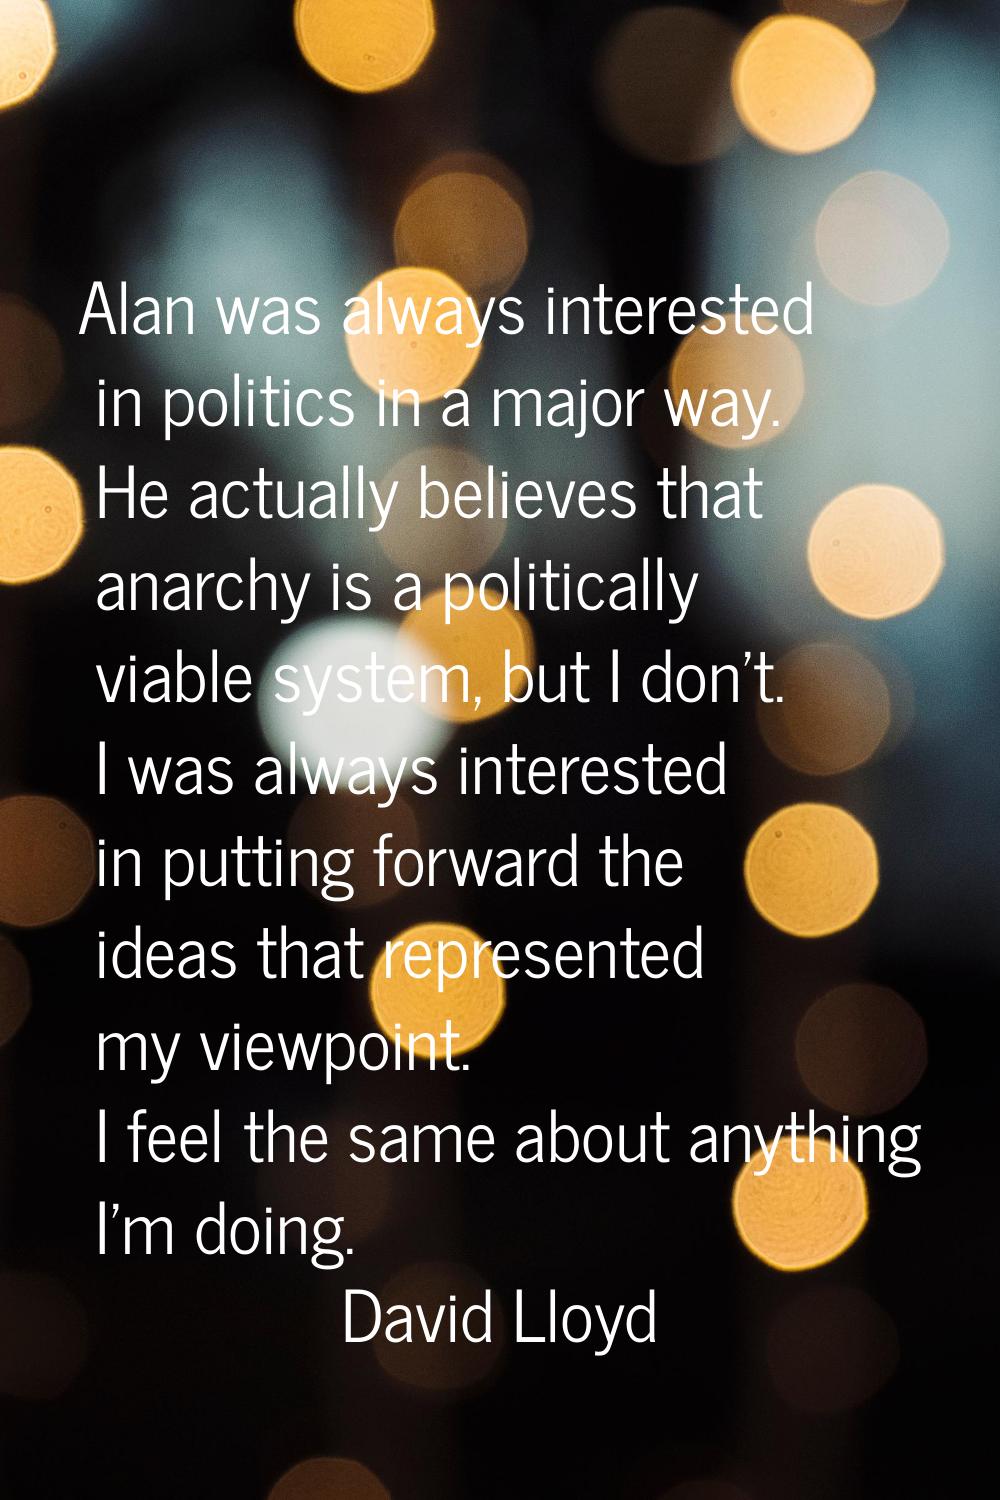 Alan was always interested in politics in a major way. He actually believes that anarchy is a polit